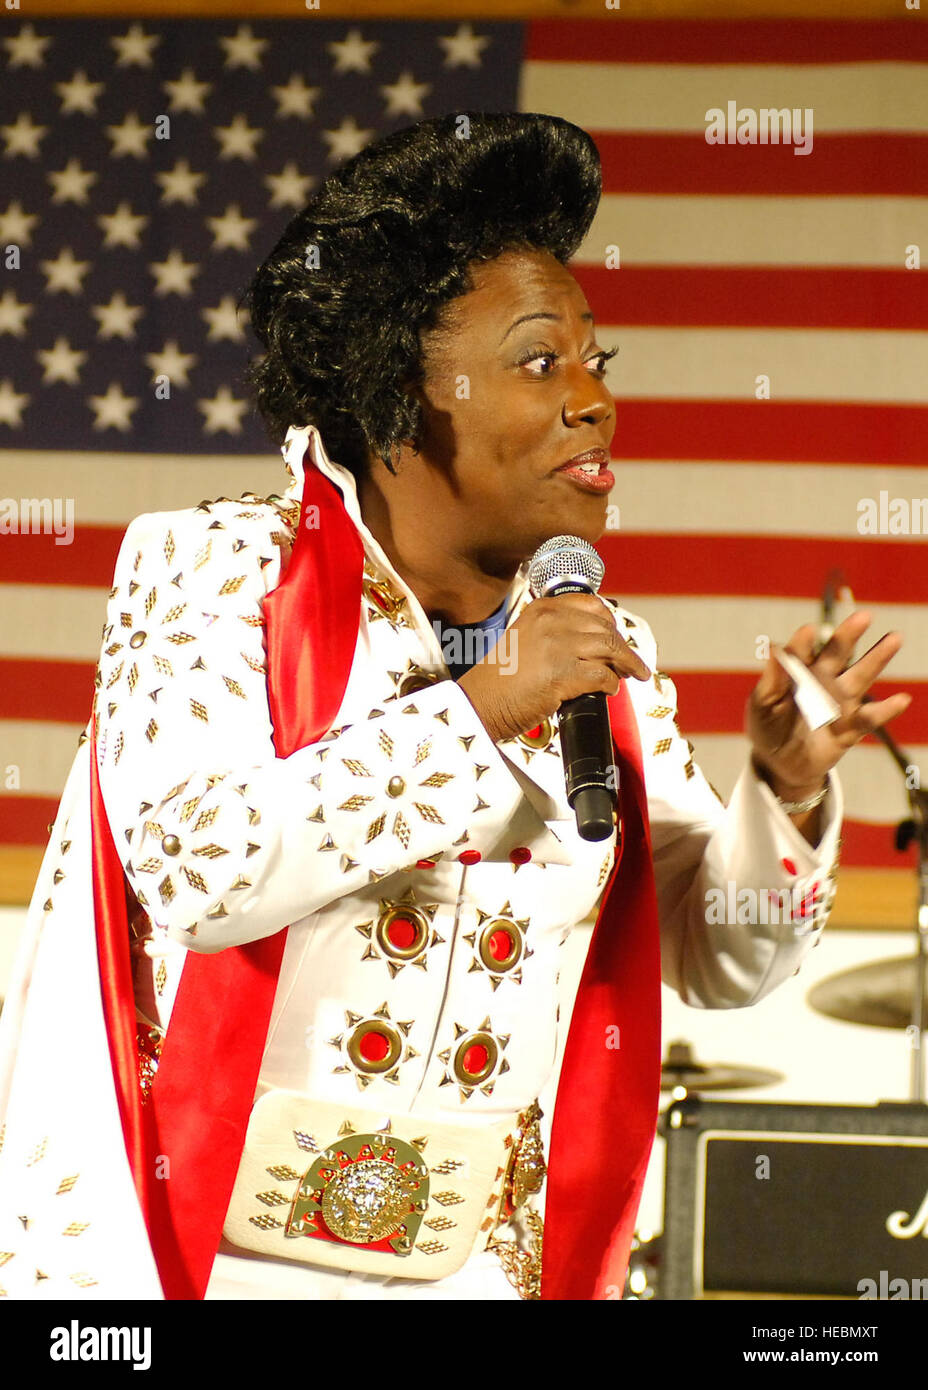 BAGRAM AIRFIELD, Afghanistan -- Sheryl Underwood, a comedian, entertains servicemembers during a United Service Organizations tour Dec. 23, 2009.  Mrs. Underwood and eight other celebrities supported the troops during this USO tour.  Mrs. Underwood hails from Little Rock, Ark.  (U.S. Air Force photo/Senior Airman Felicia Juenke) Stock Photo